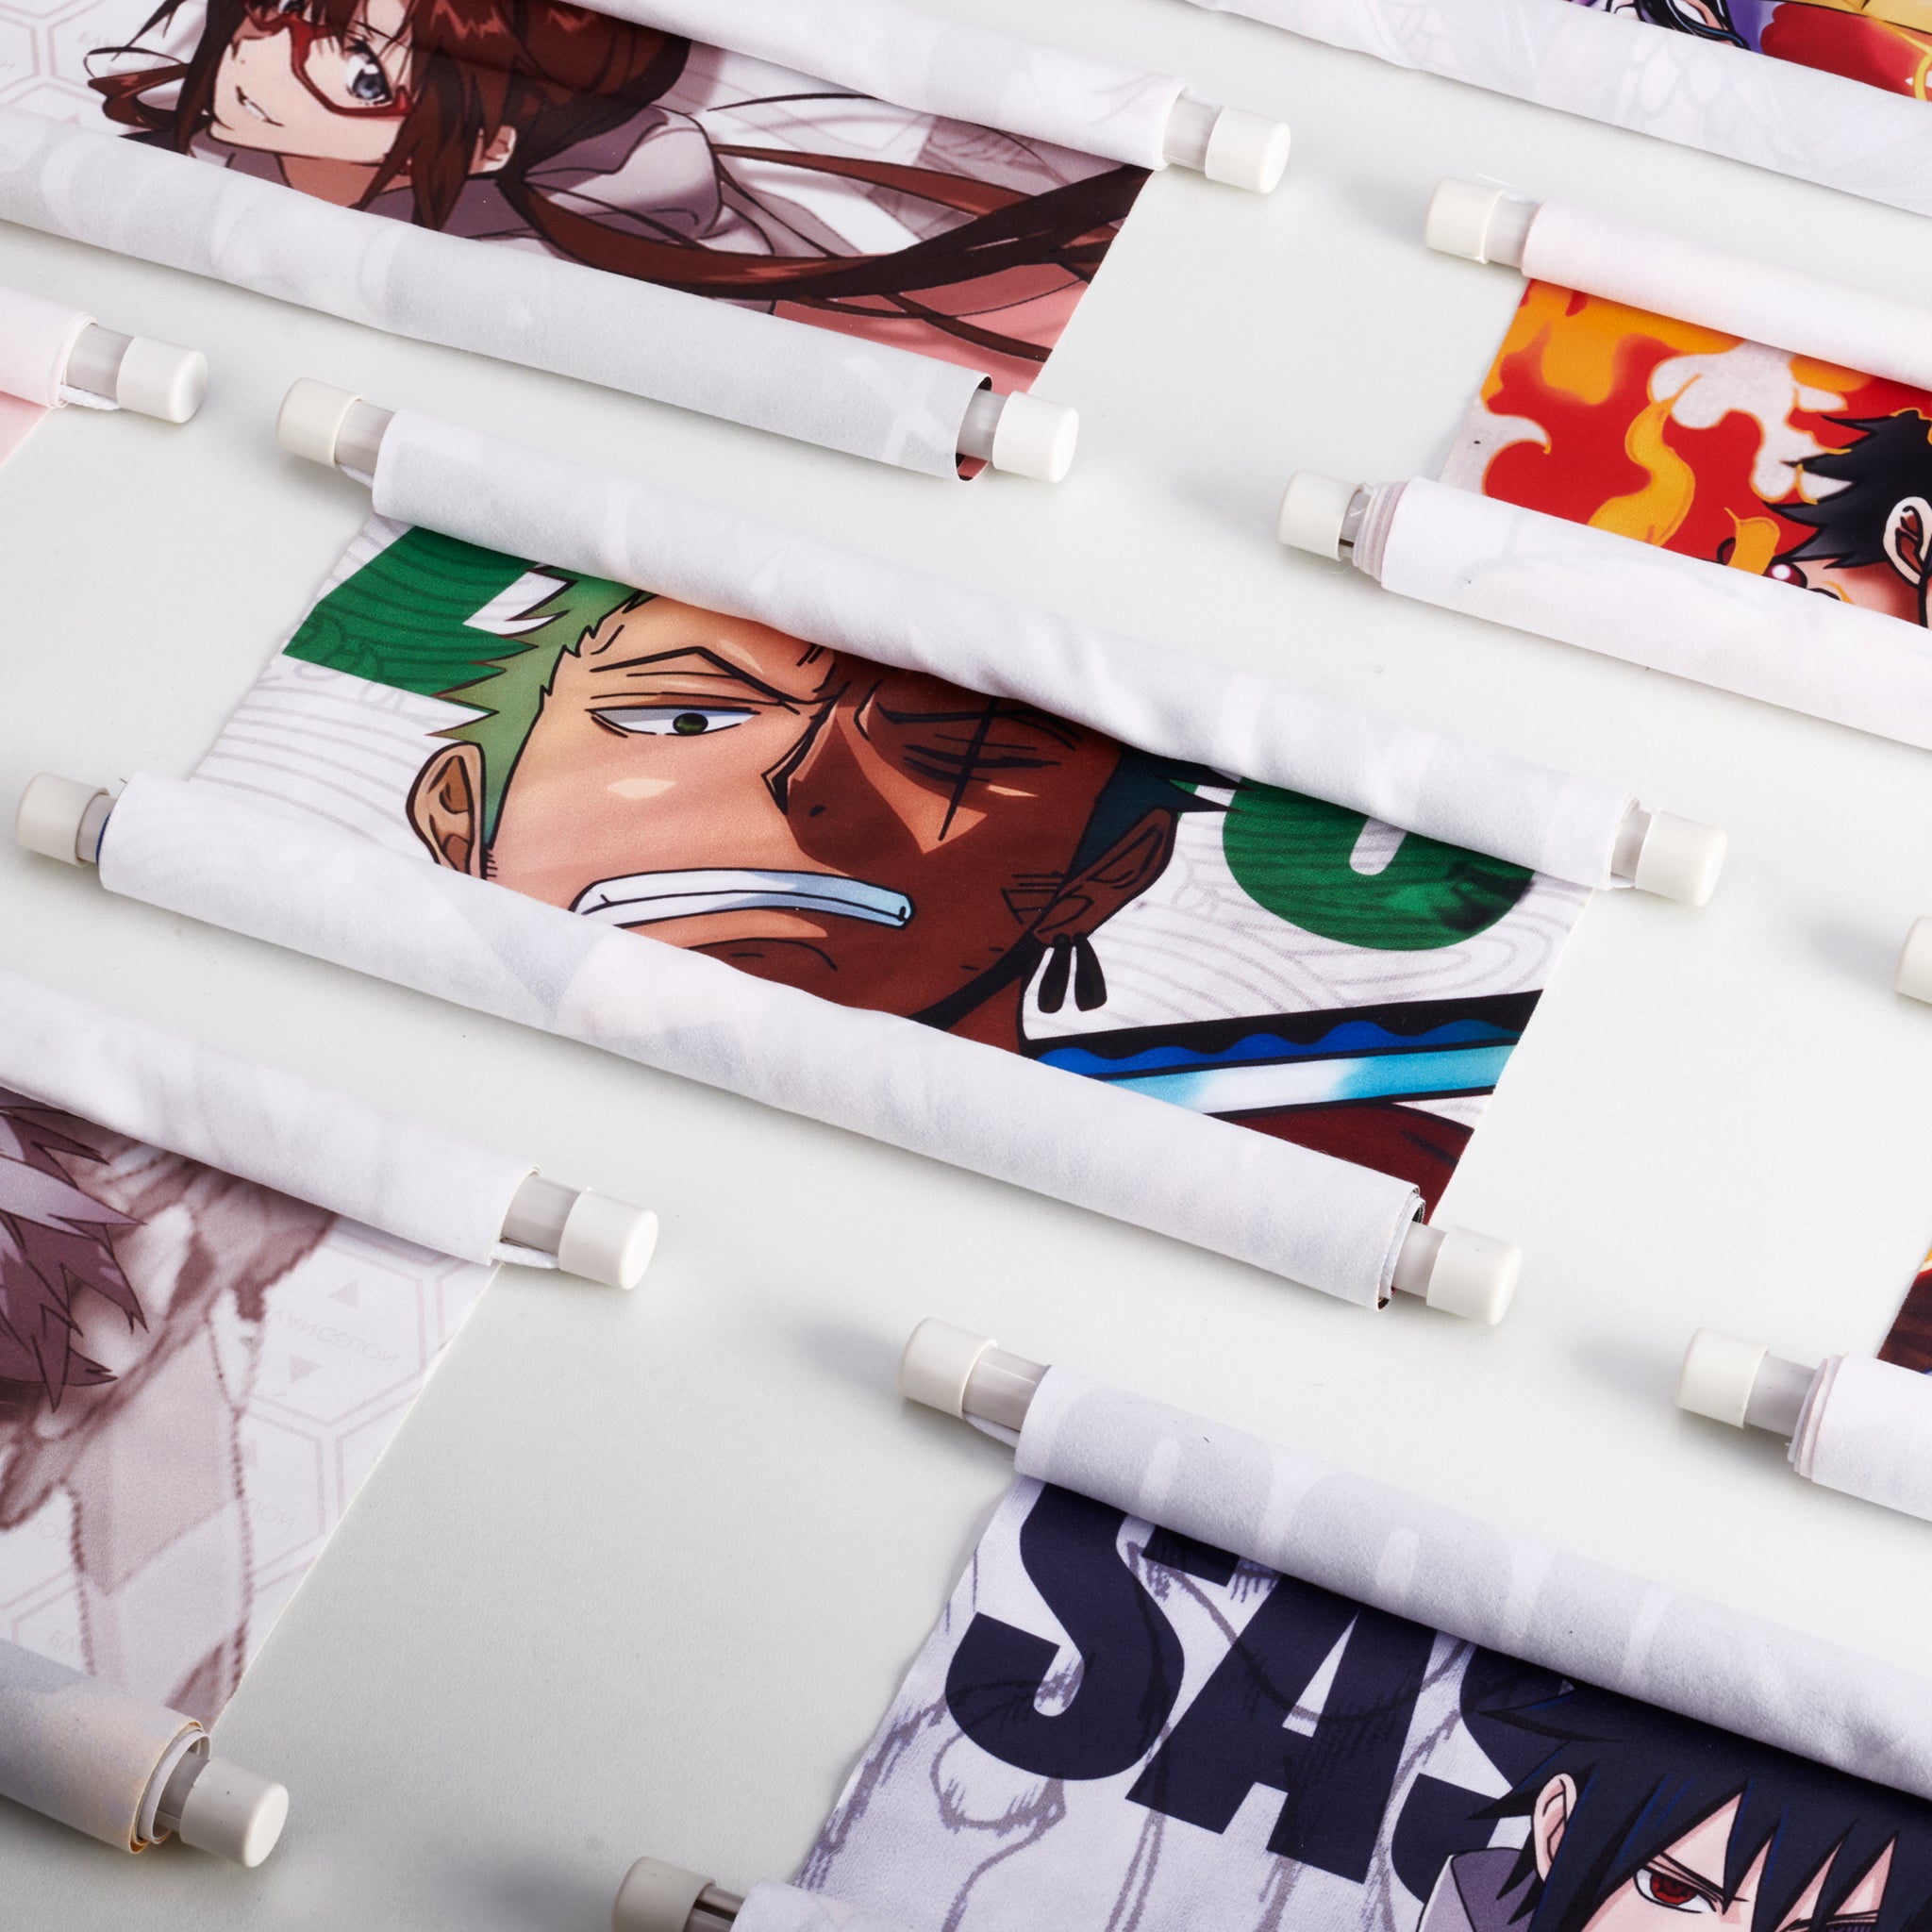 Naruto Poster Fabric Scroll Painting Wall Picture Naruto Anime Characters  Wall Scroll Hanging Decor - Walmart.com